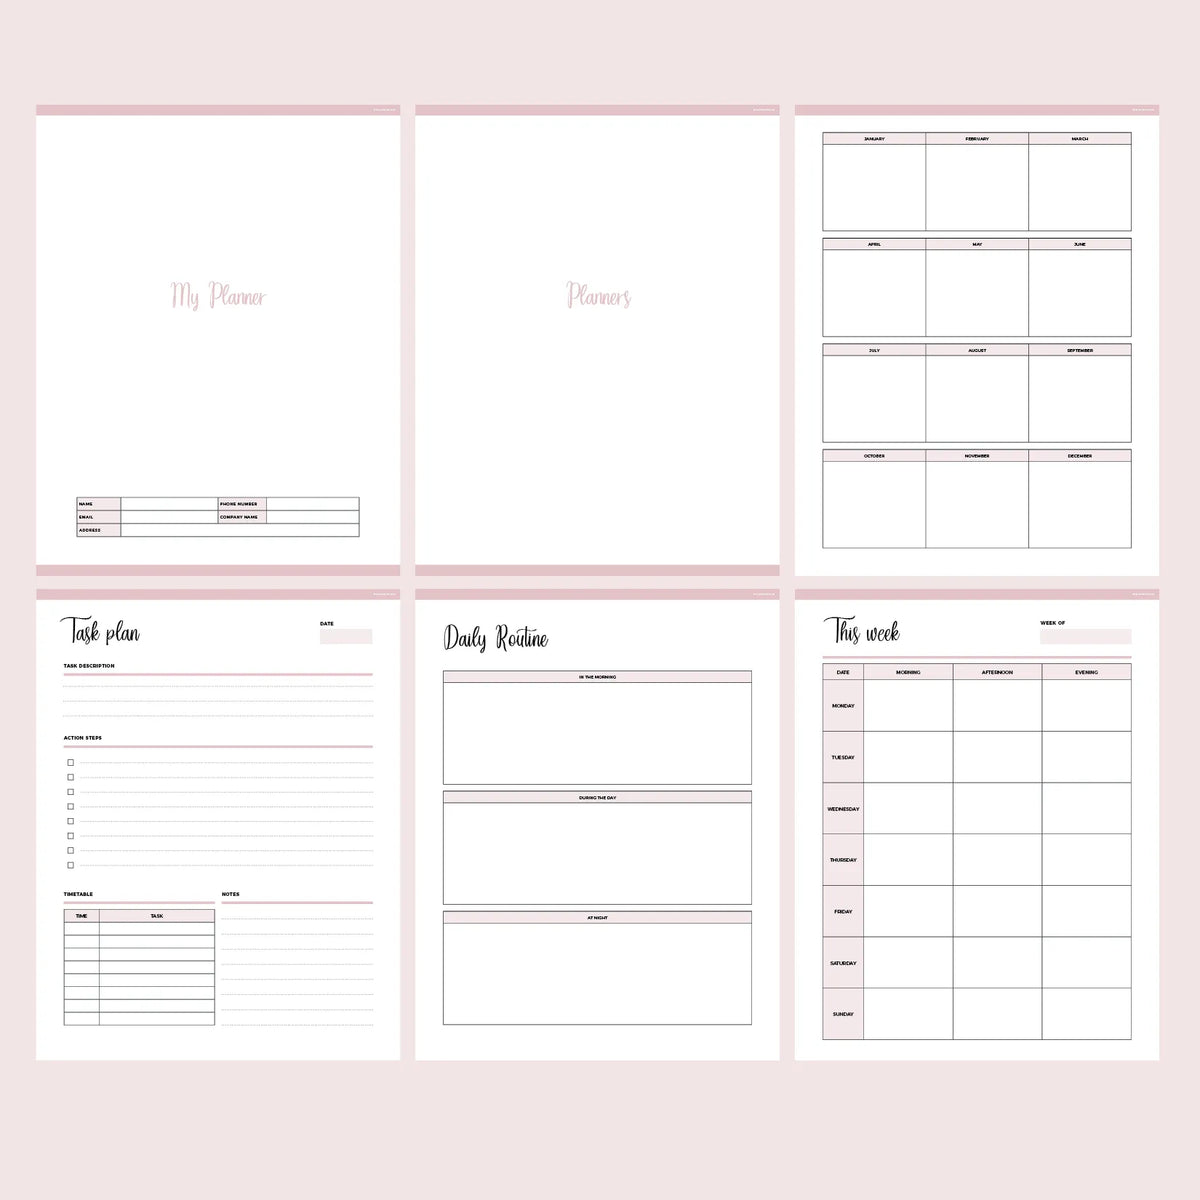 Budget Planner {160+ Pages}